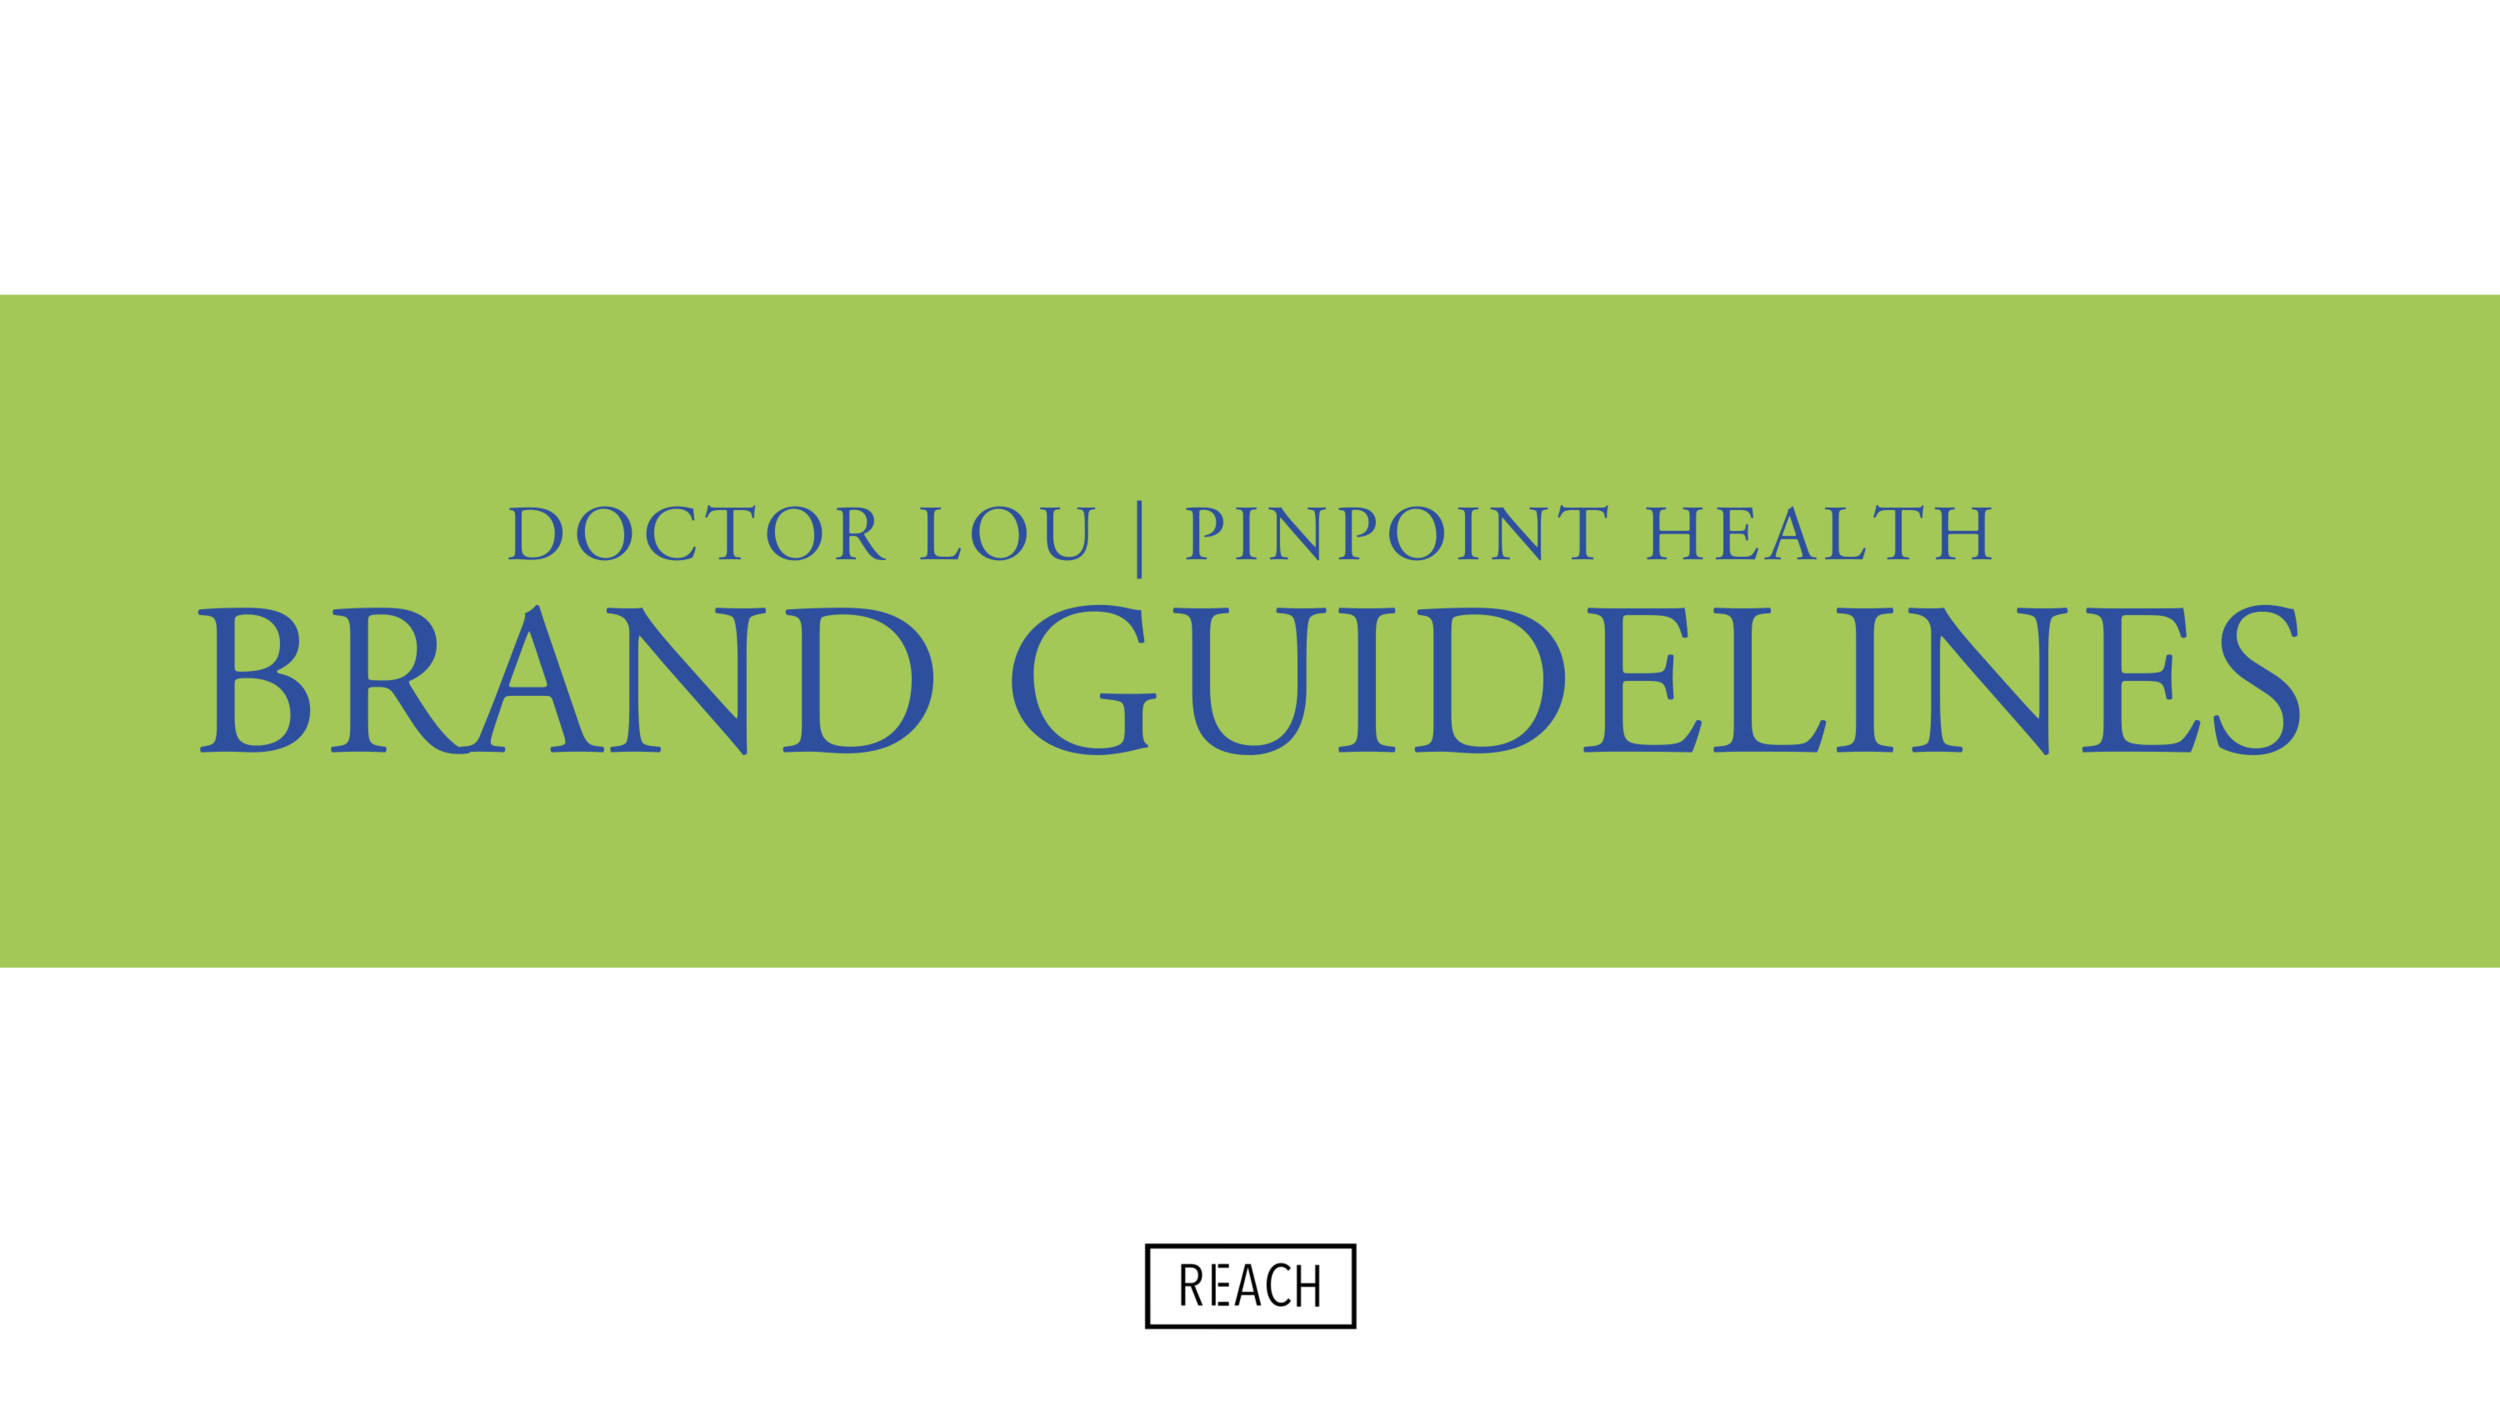 Doctor Lou - Brand Guidelines 2019 (dragged).png